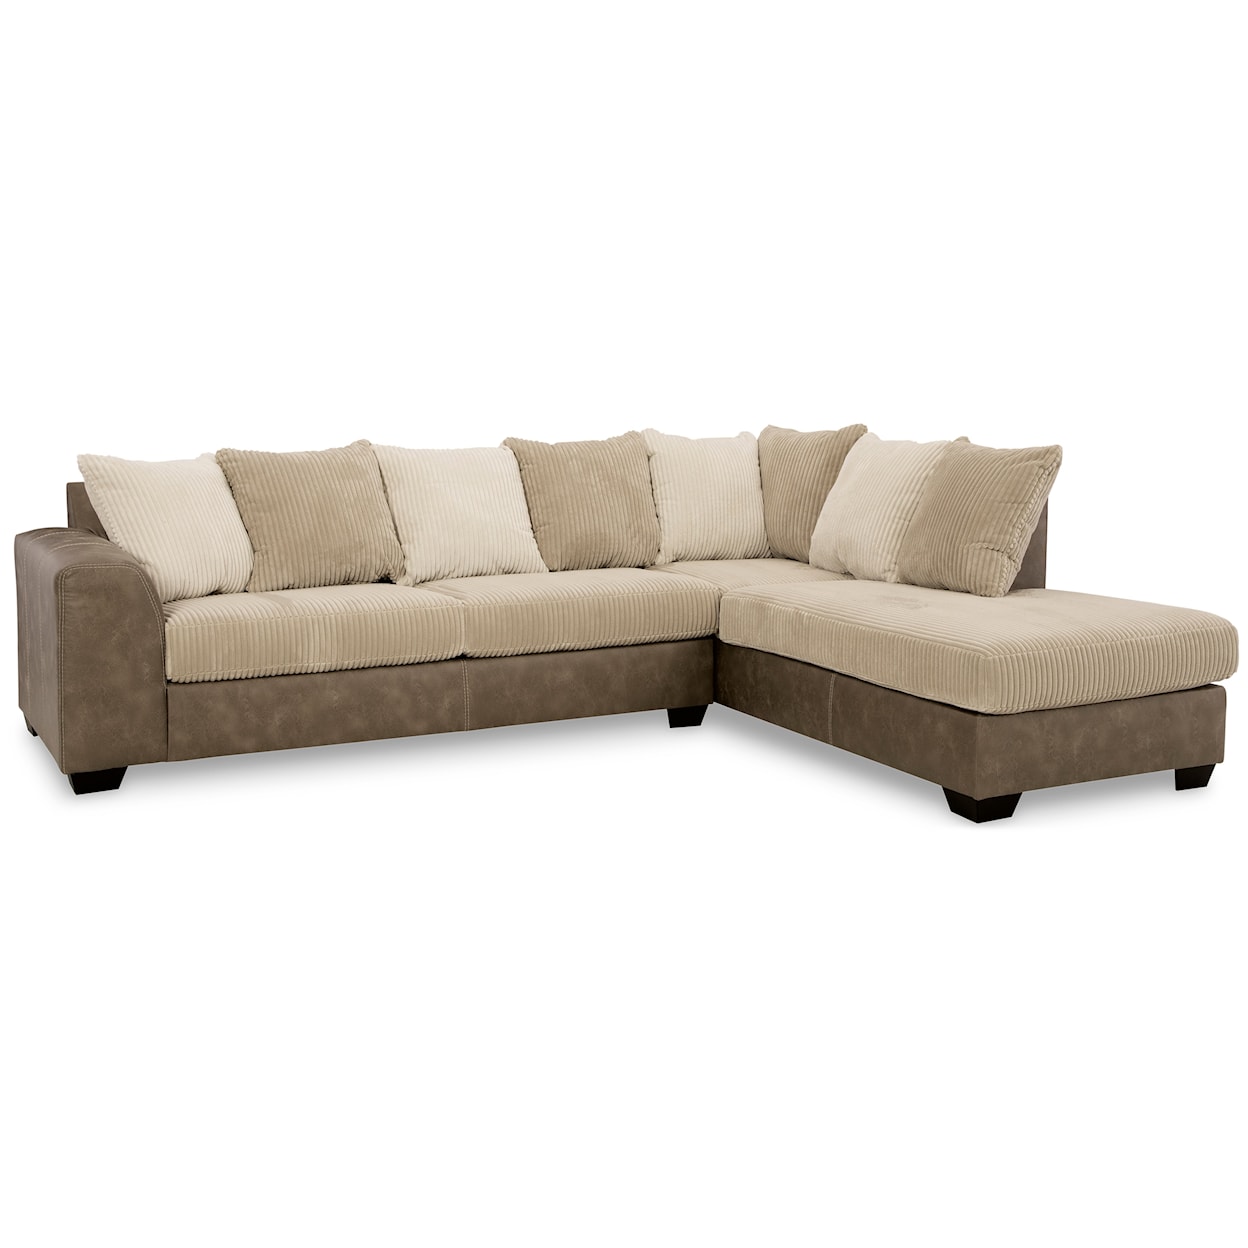 Signature Keskin 2-Piece Sectional with Chaise